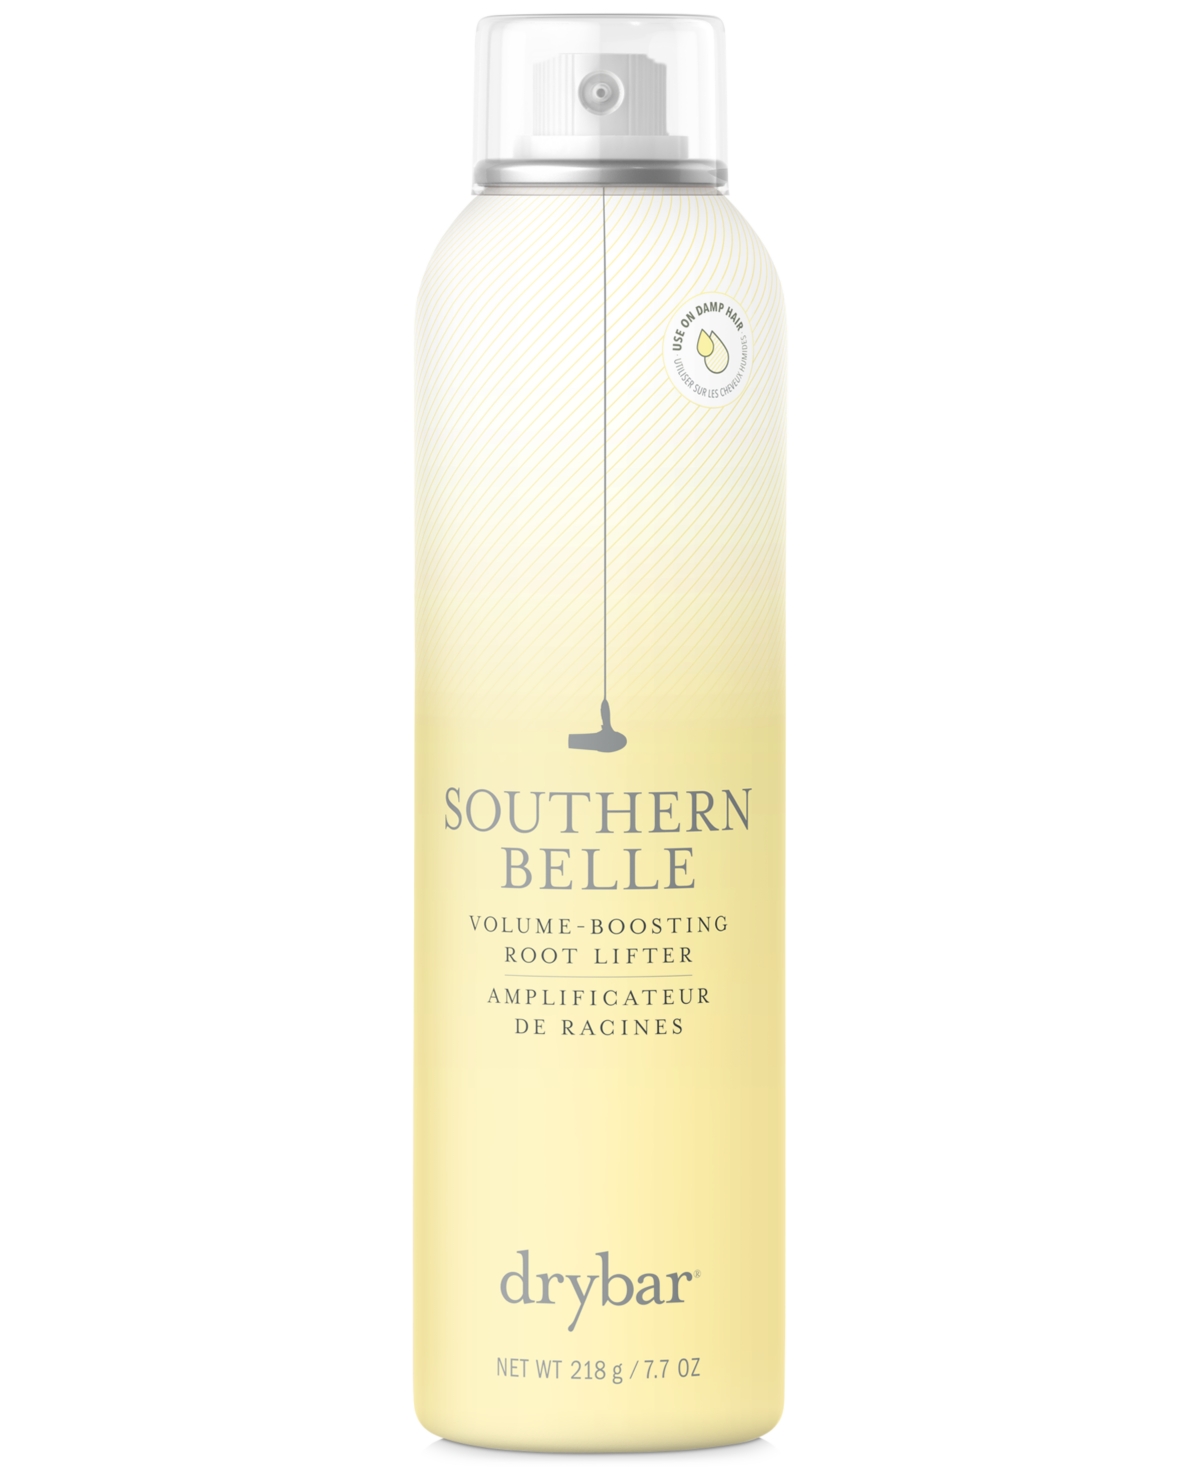 Southern Belle Volume-Boosting Root Lifter, 7.7 oz.